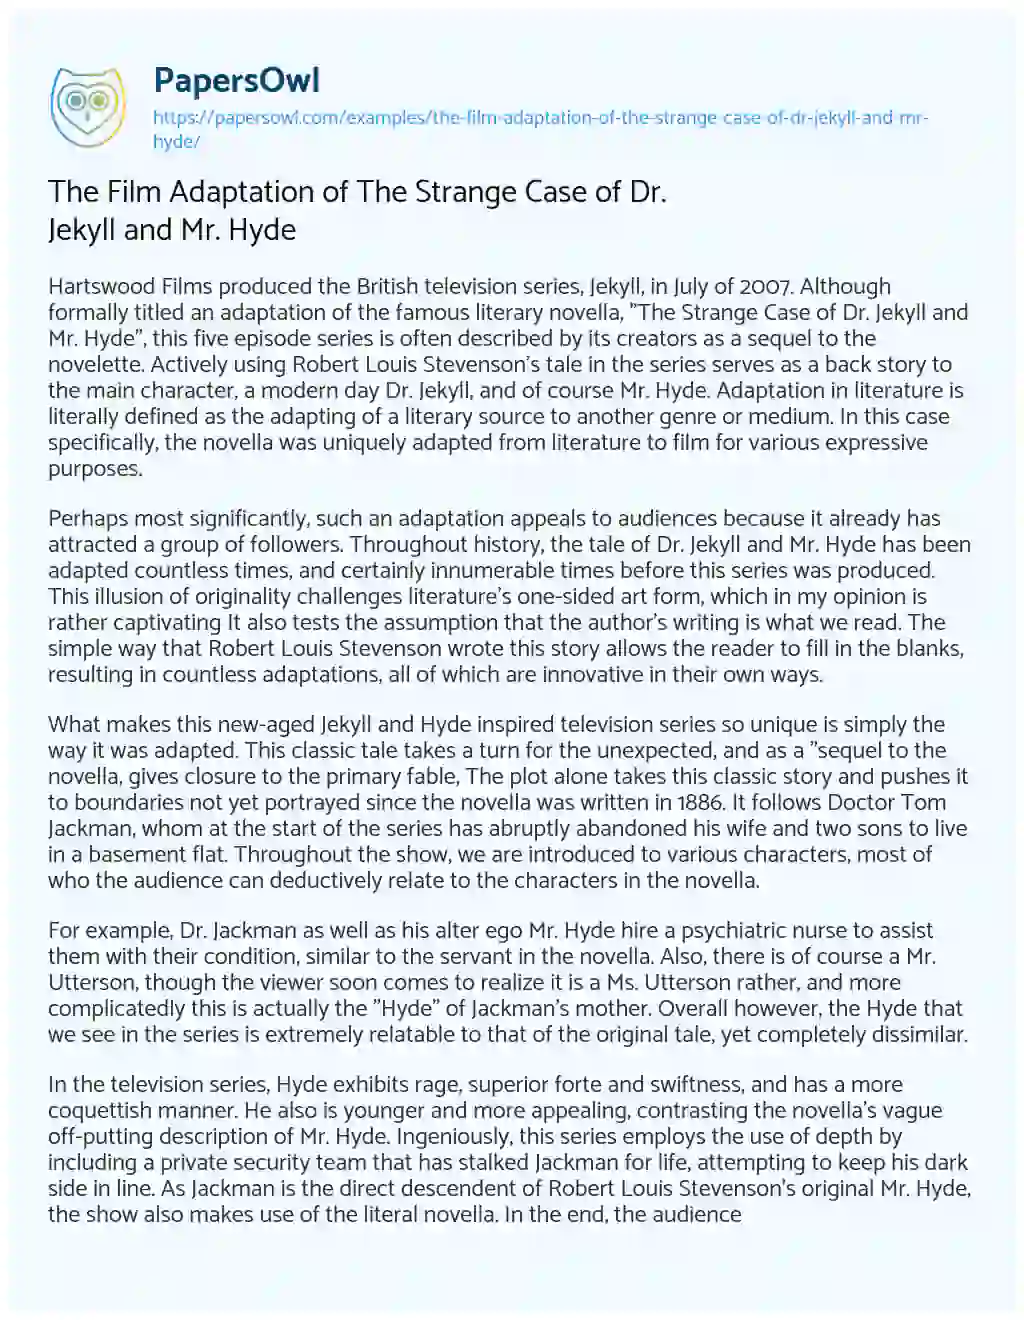 Essay on The Film Adaptation of the Strange Case of Dr. Jekyll and Mr. Hyde